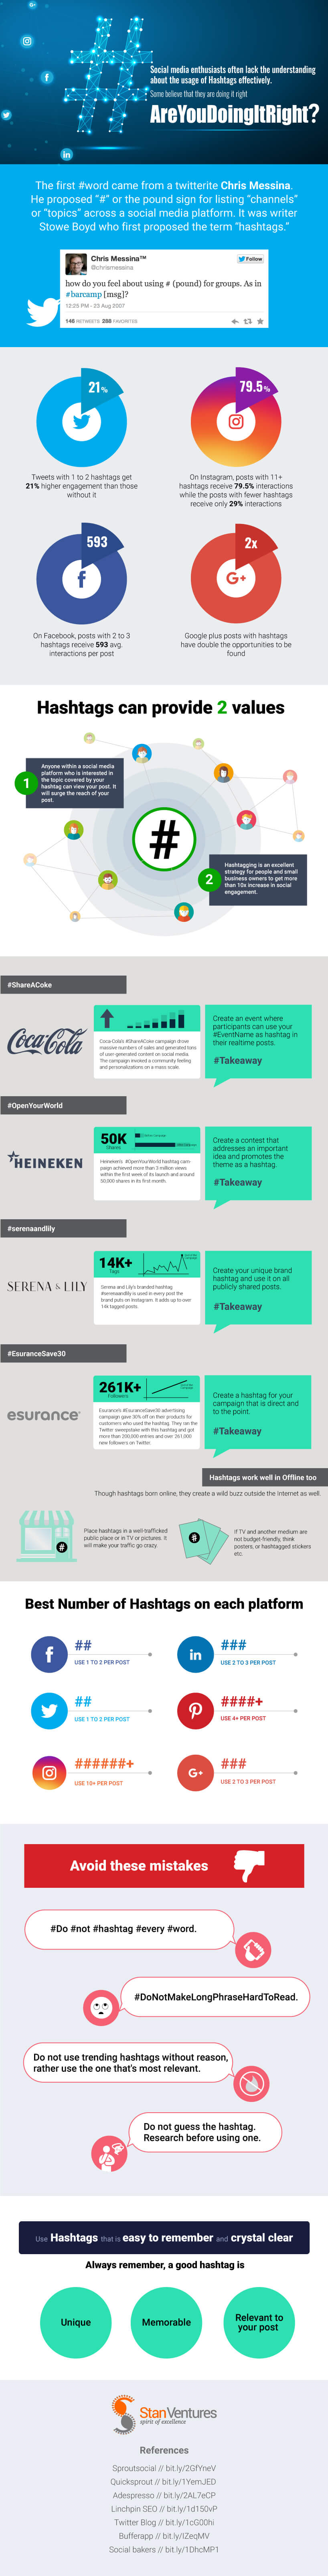 How to Use Hashtags Effectively? [Infographic]